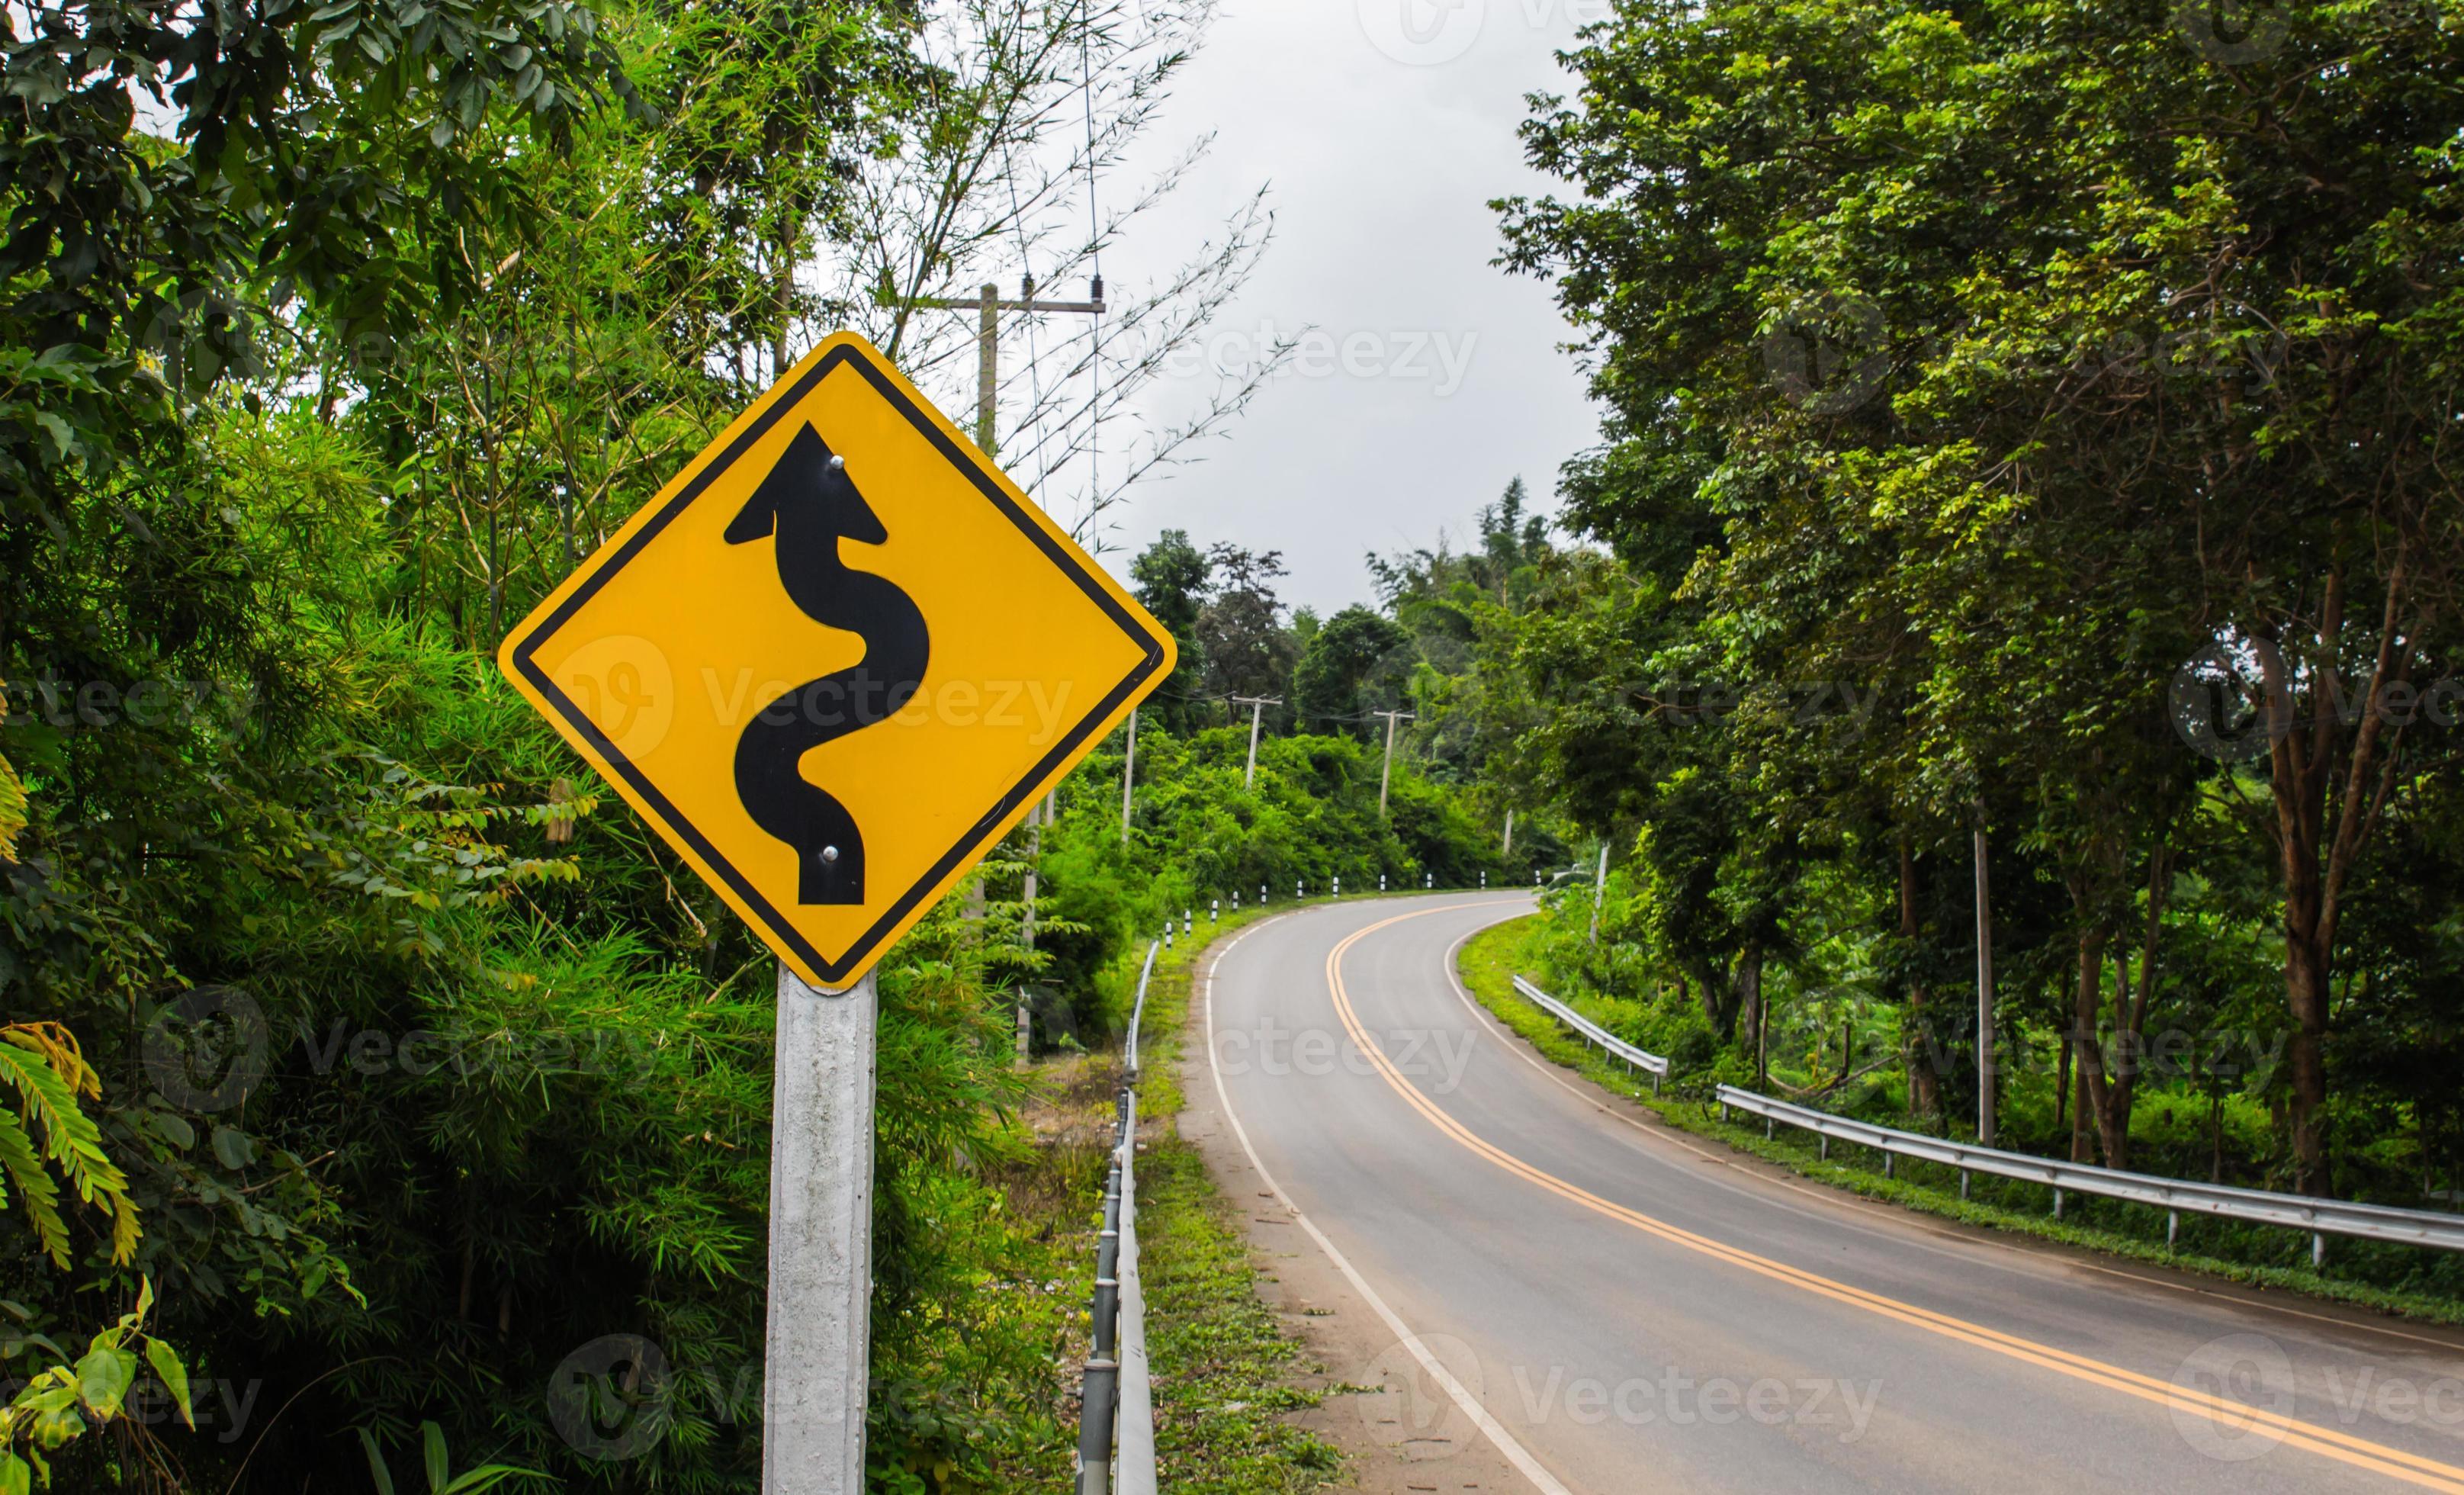 Curvy Road Sign To The Mountain In Rural Area Stock Photo